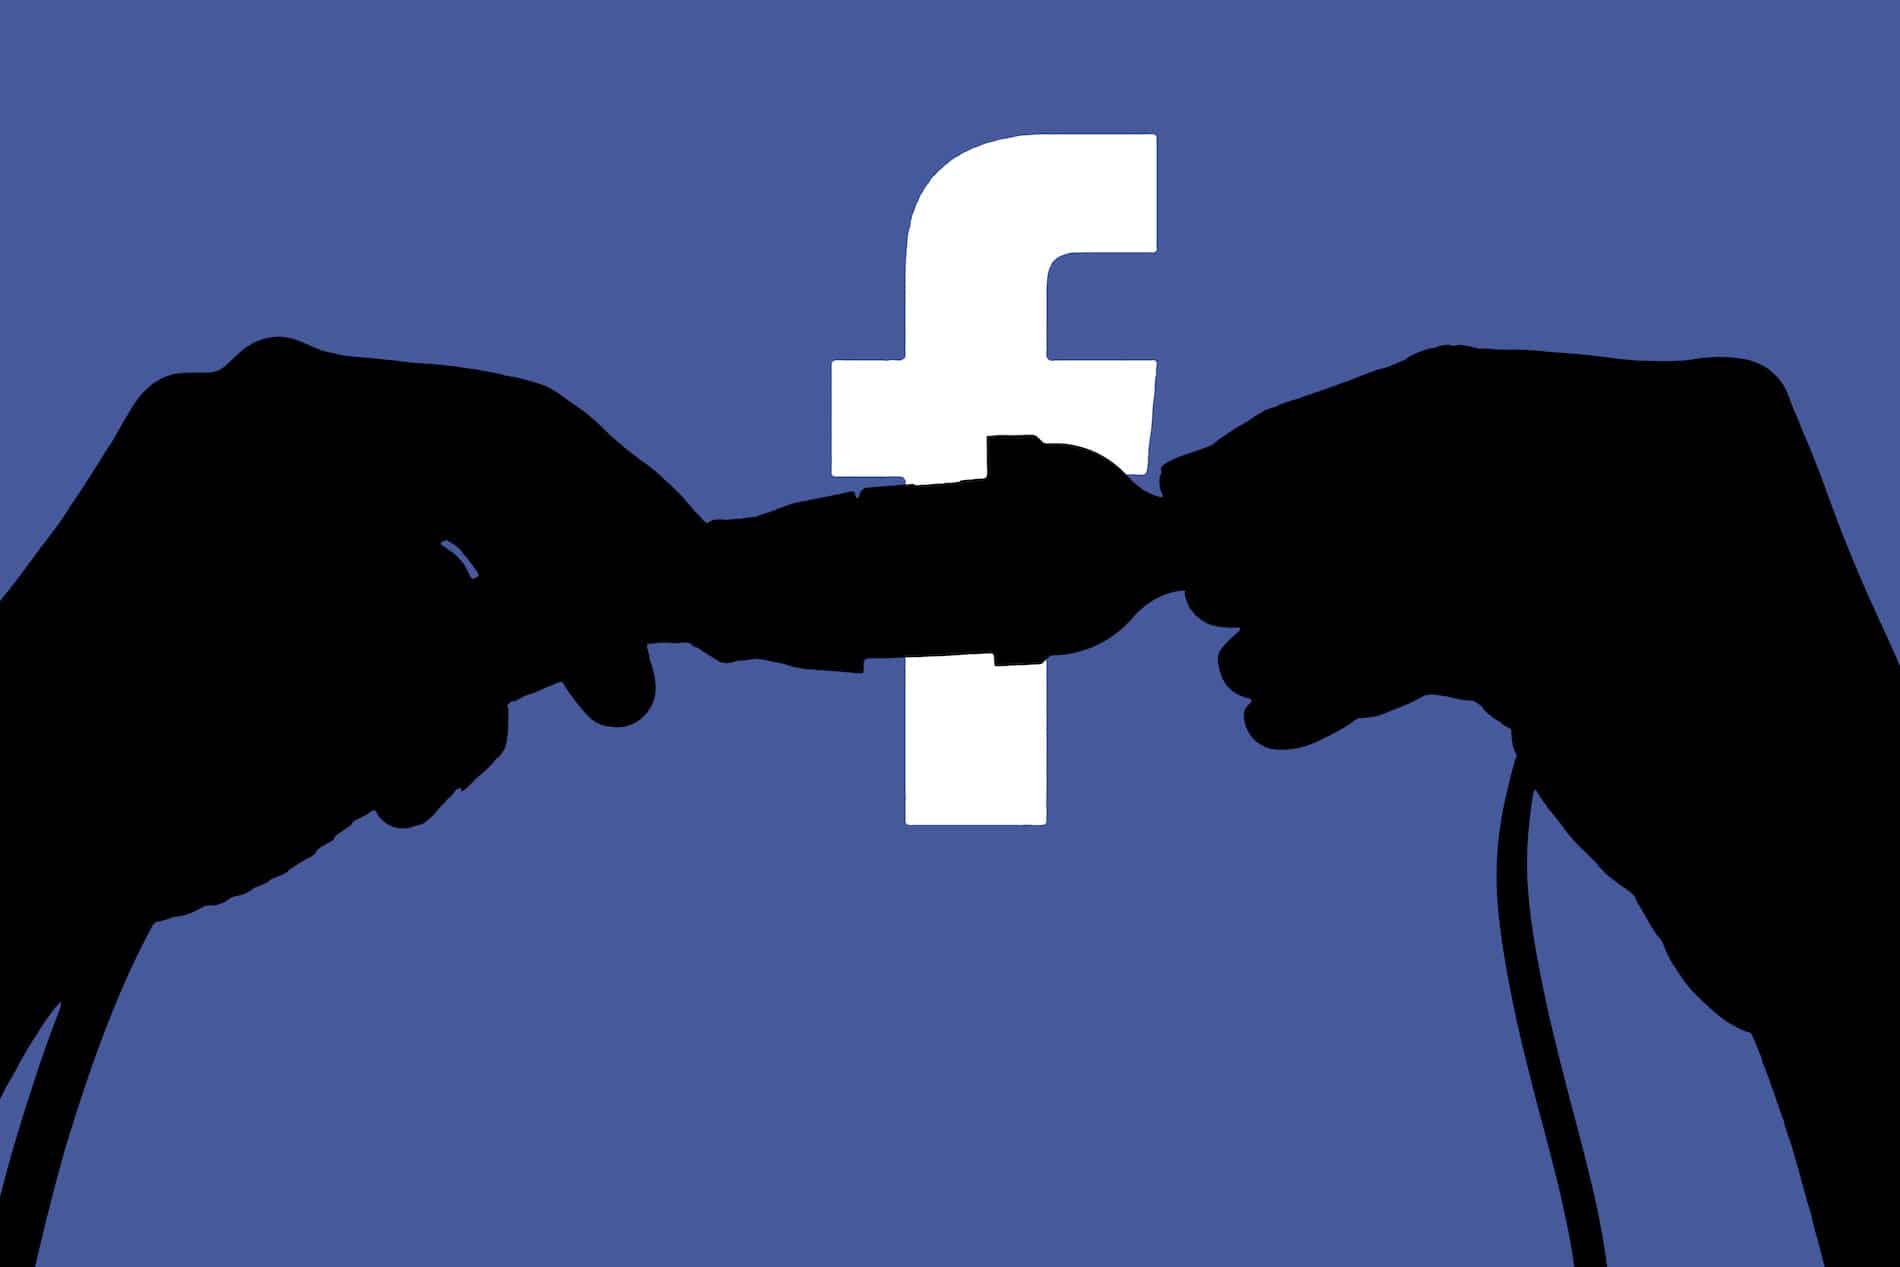 Switching off Facebook. Silhouette of person hands disconnecting plugs, symbol of Facebook global outage